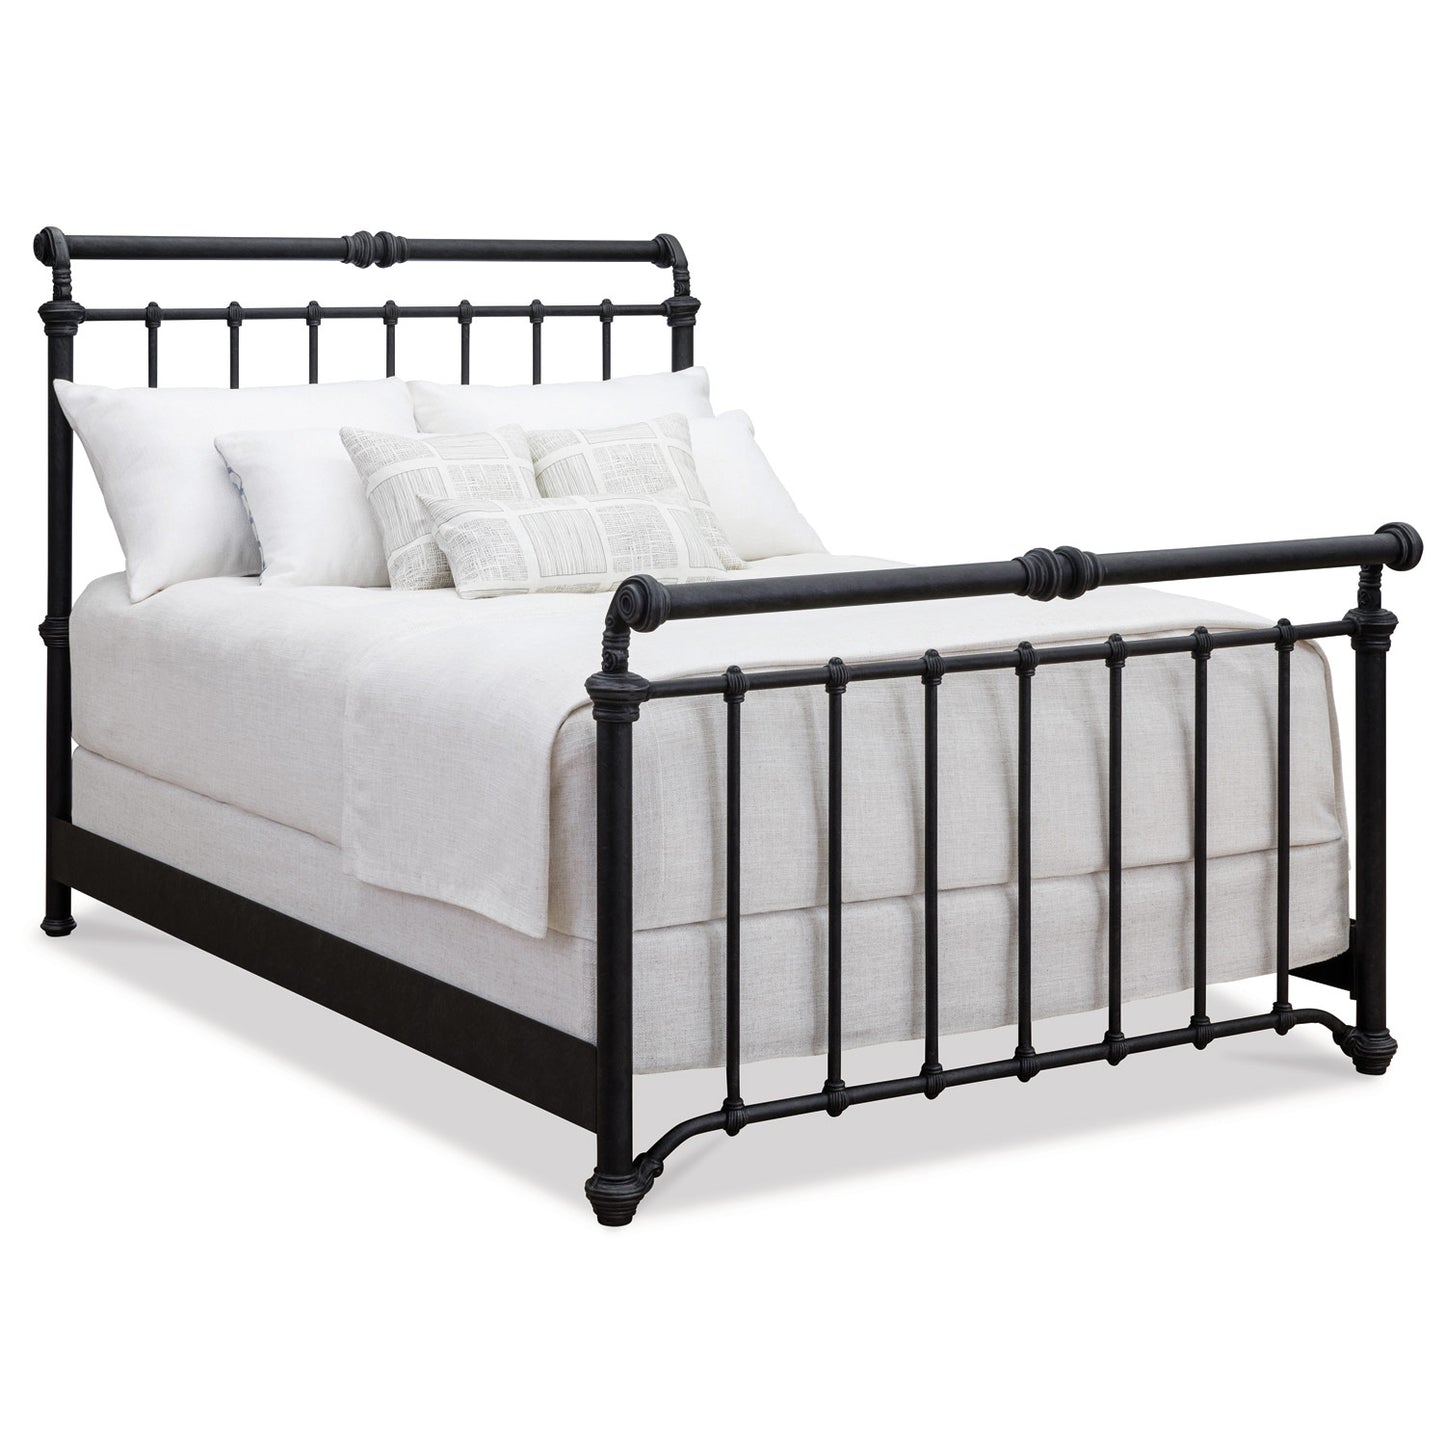 Sheffield Iron Bed 1039 Wesley Allen Queen CBMPF Aged Iron Finish Matriae